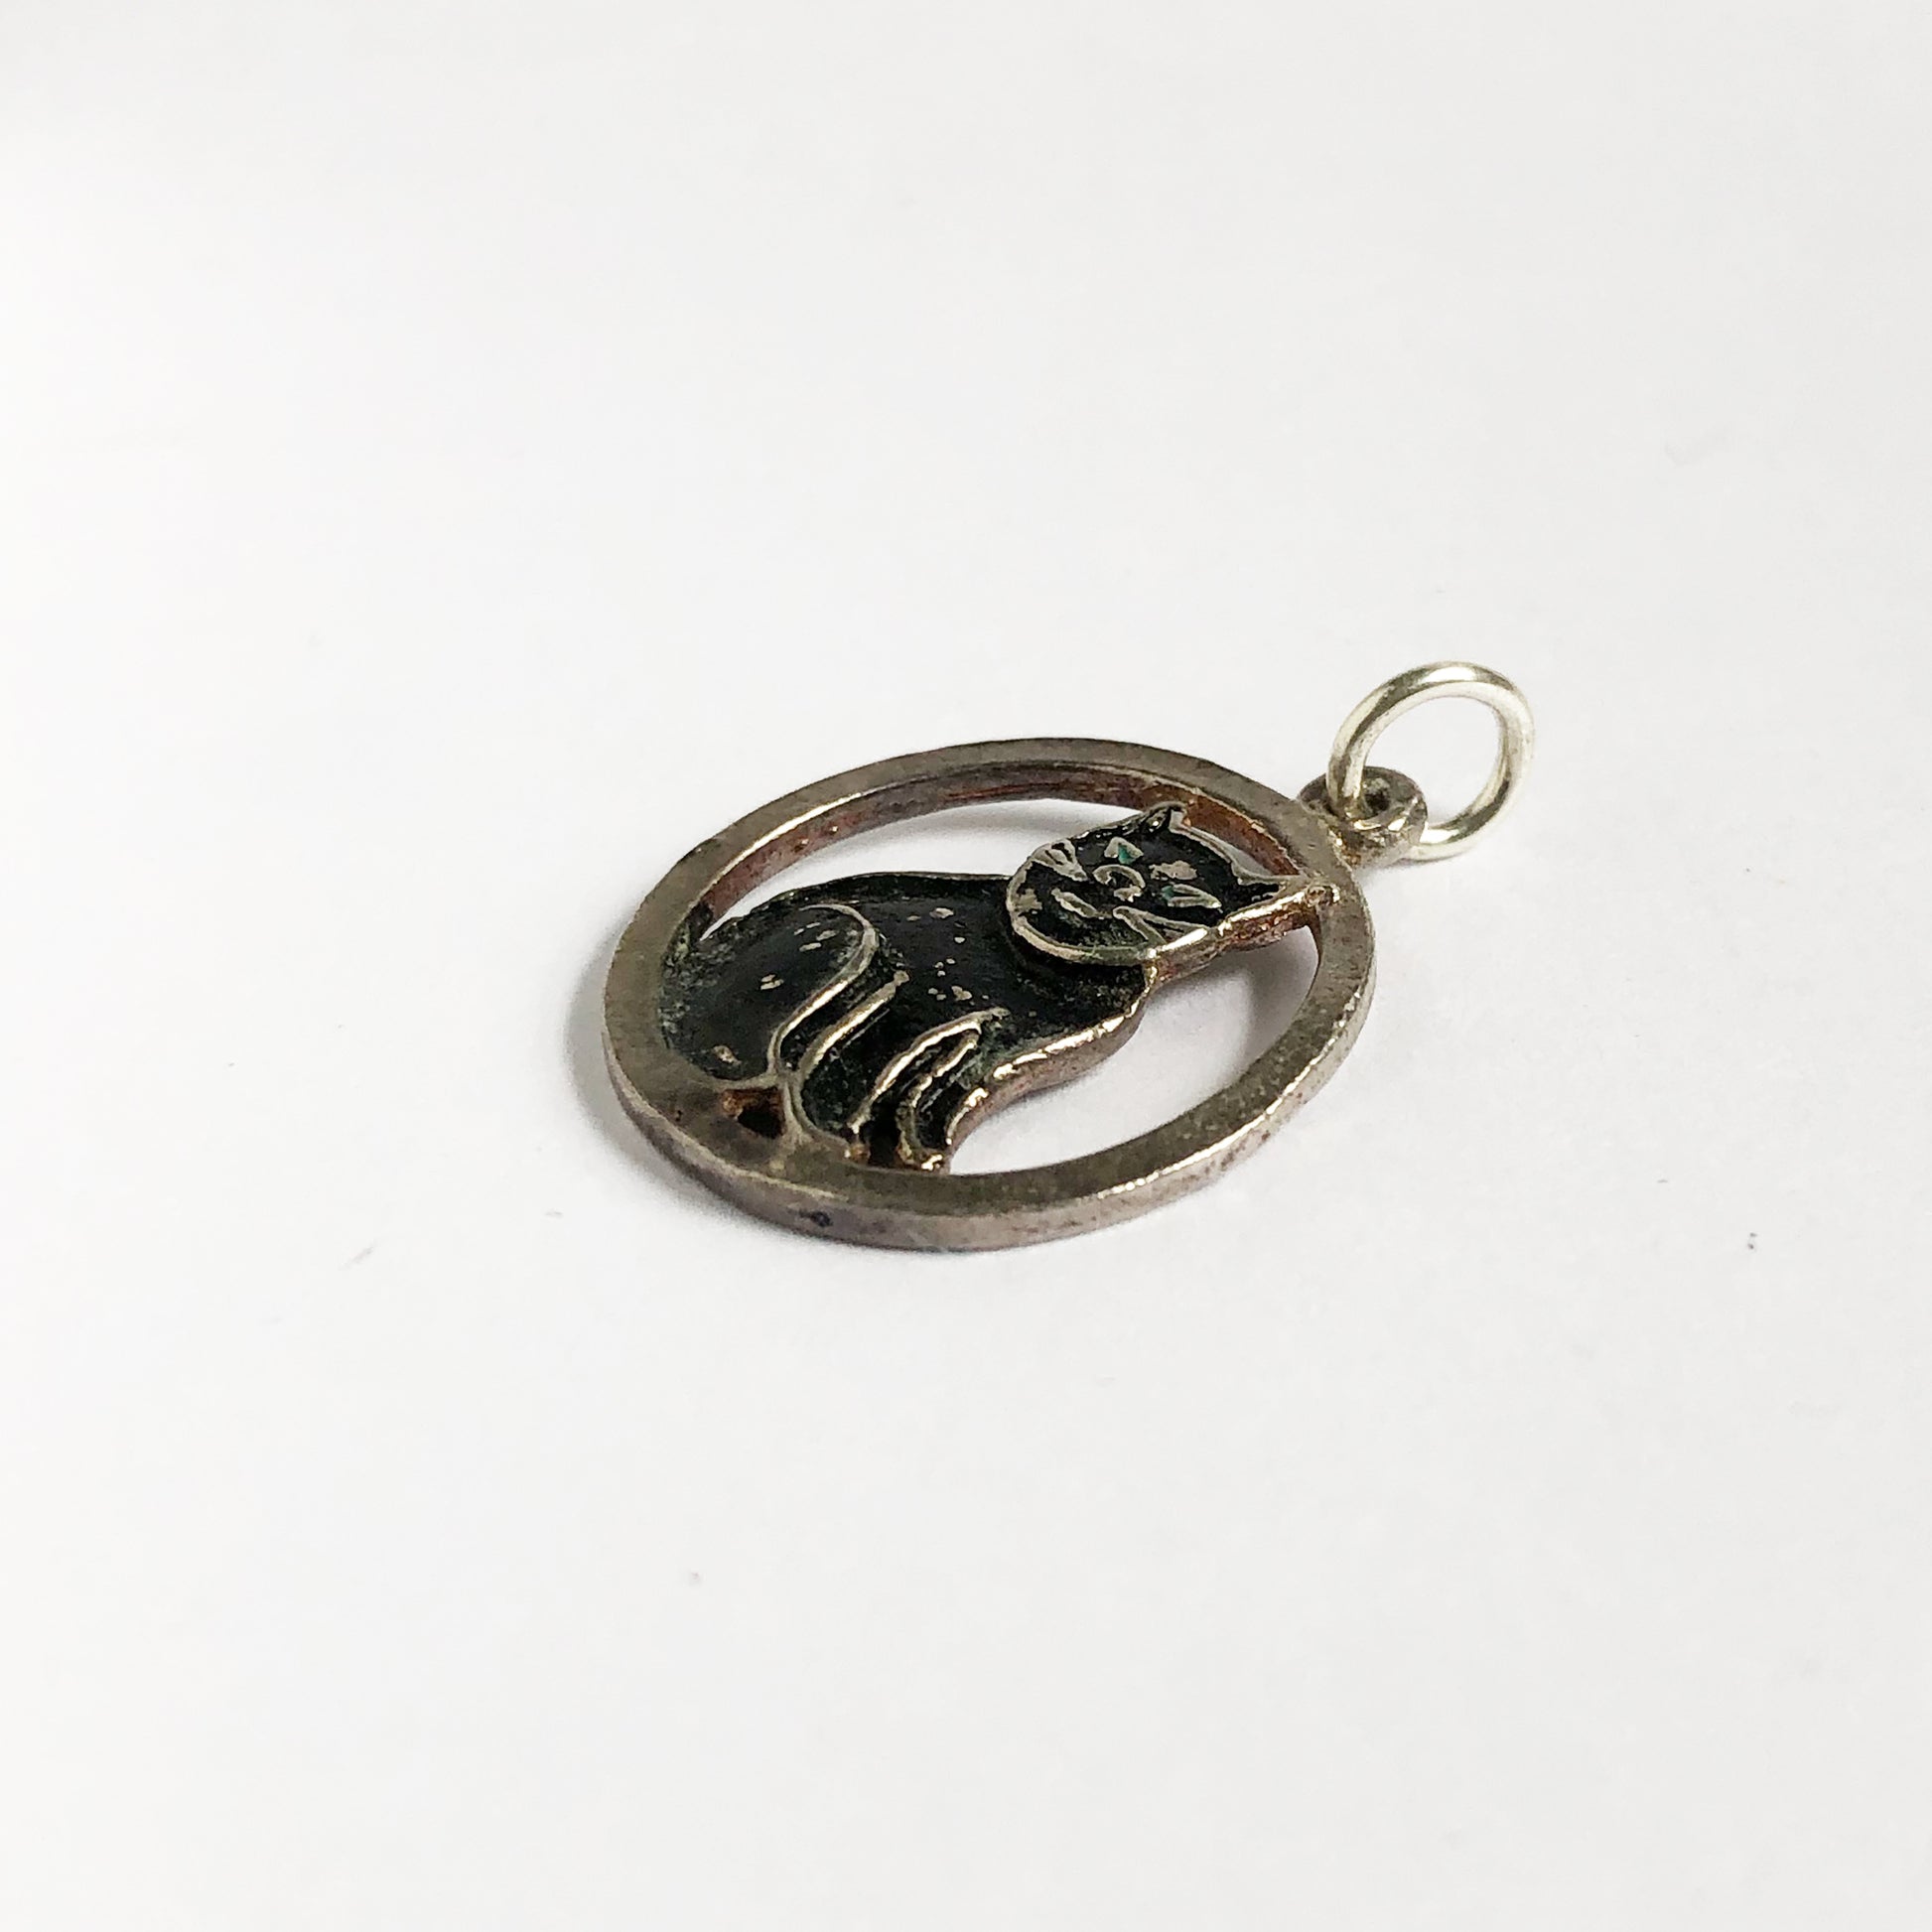 Vintage silver and black enamel cat charm with green eyes